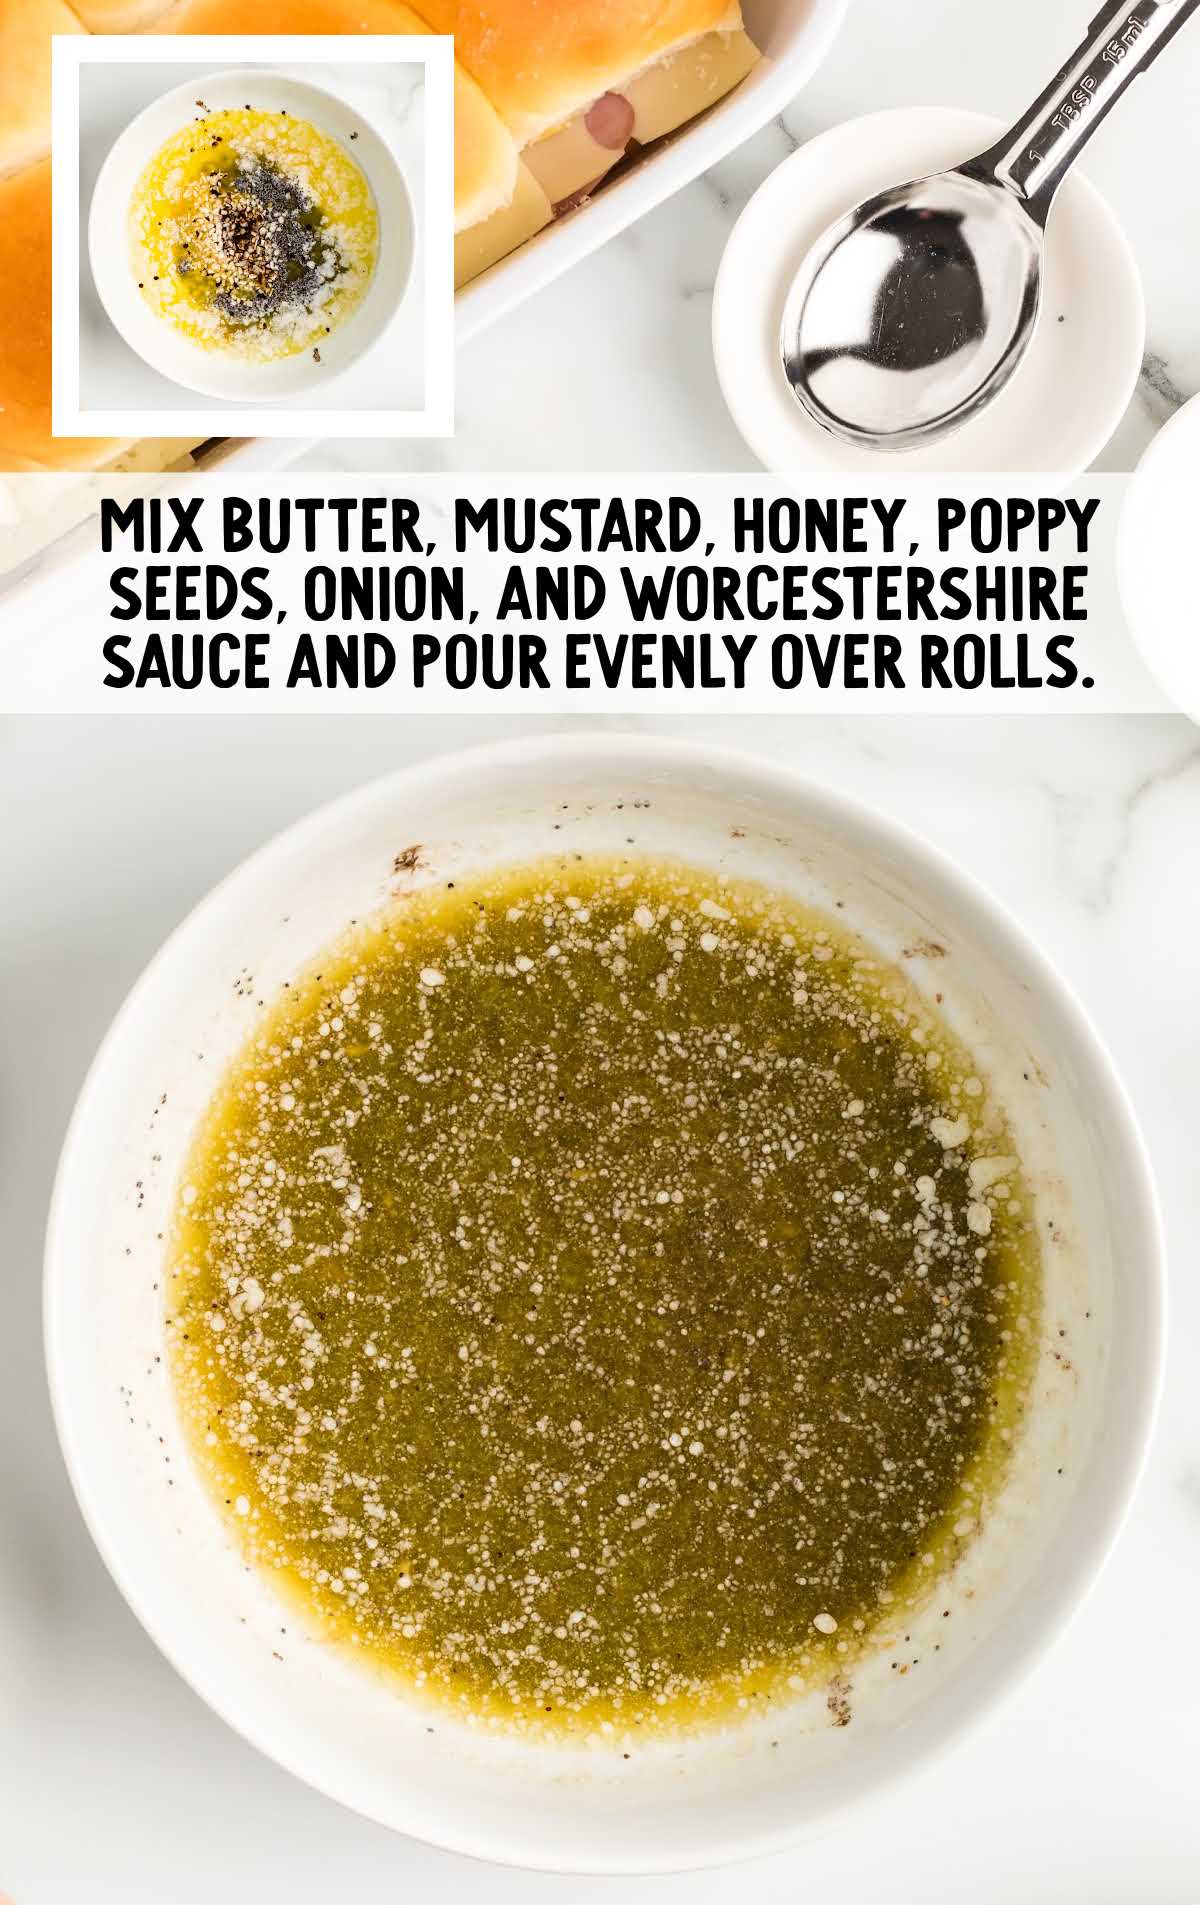 butter, mustard, honey, poppy seeds, onion, and Worcestershire sauce mixed in a bowl